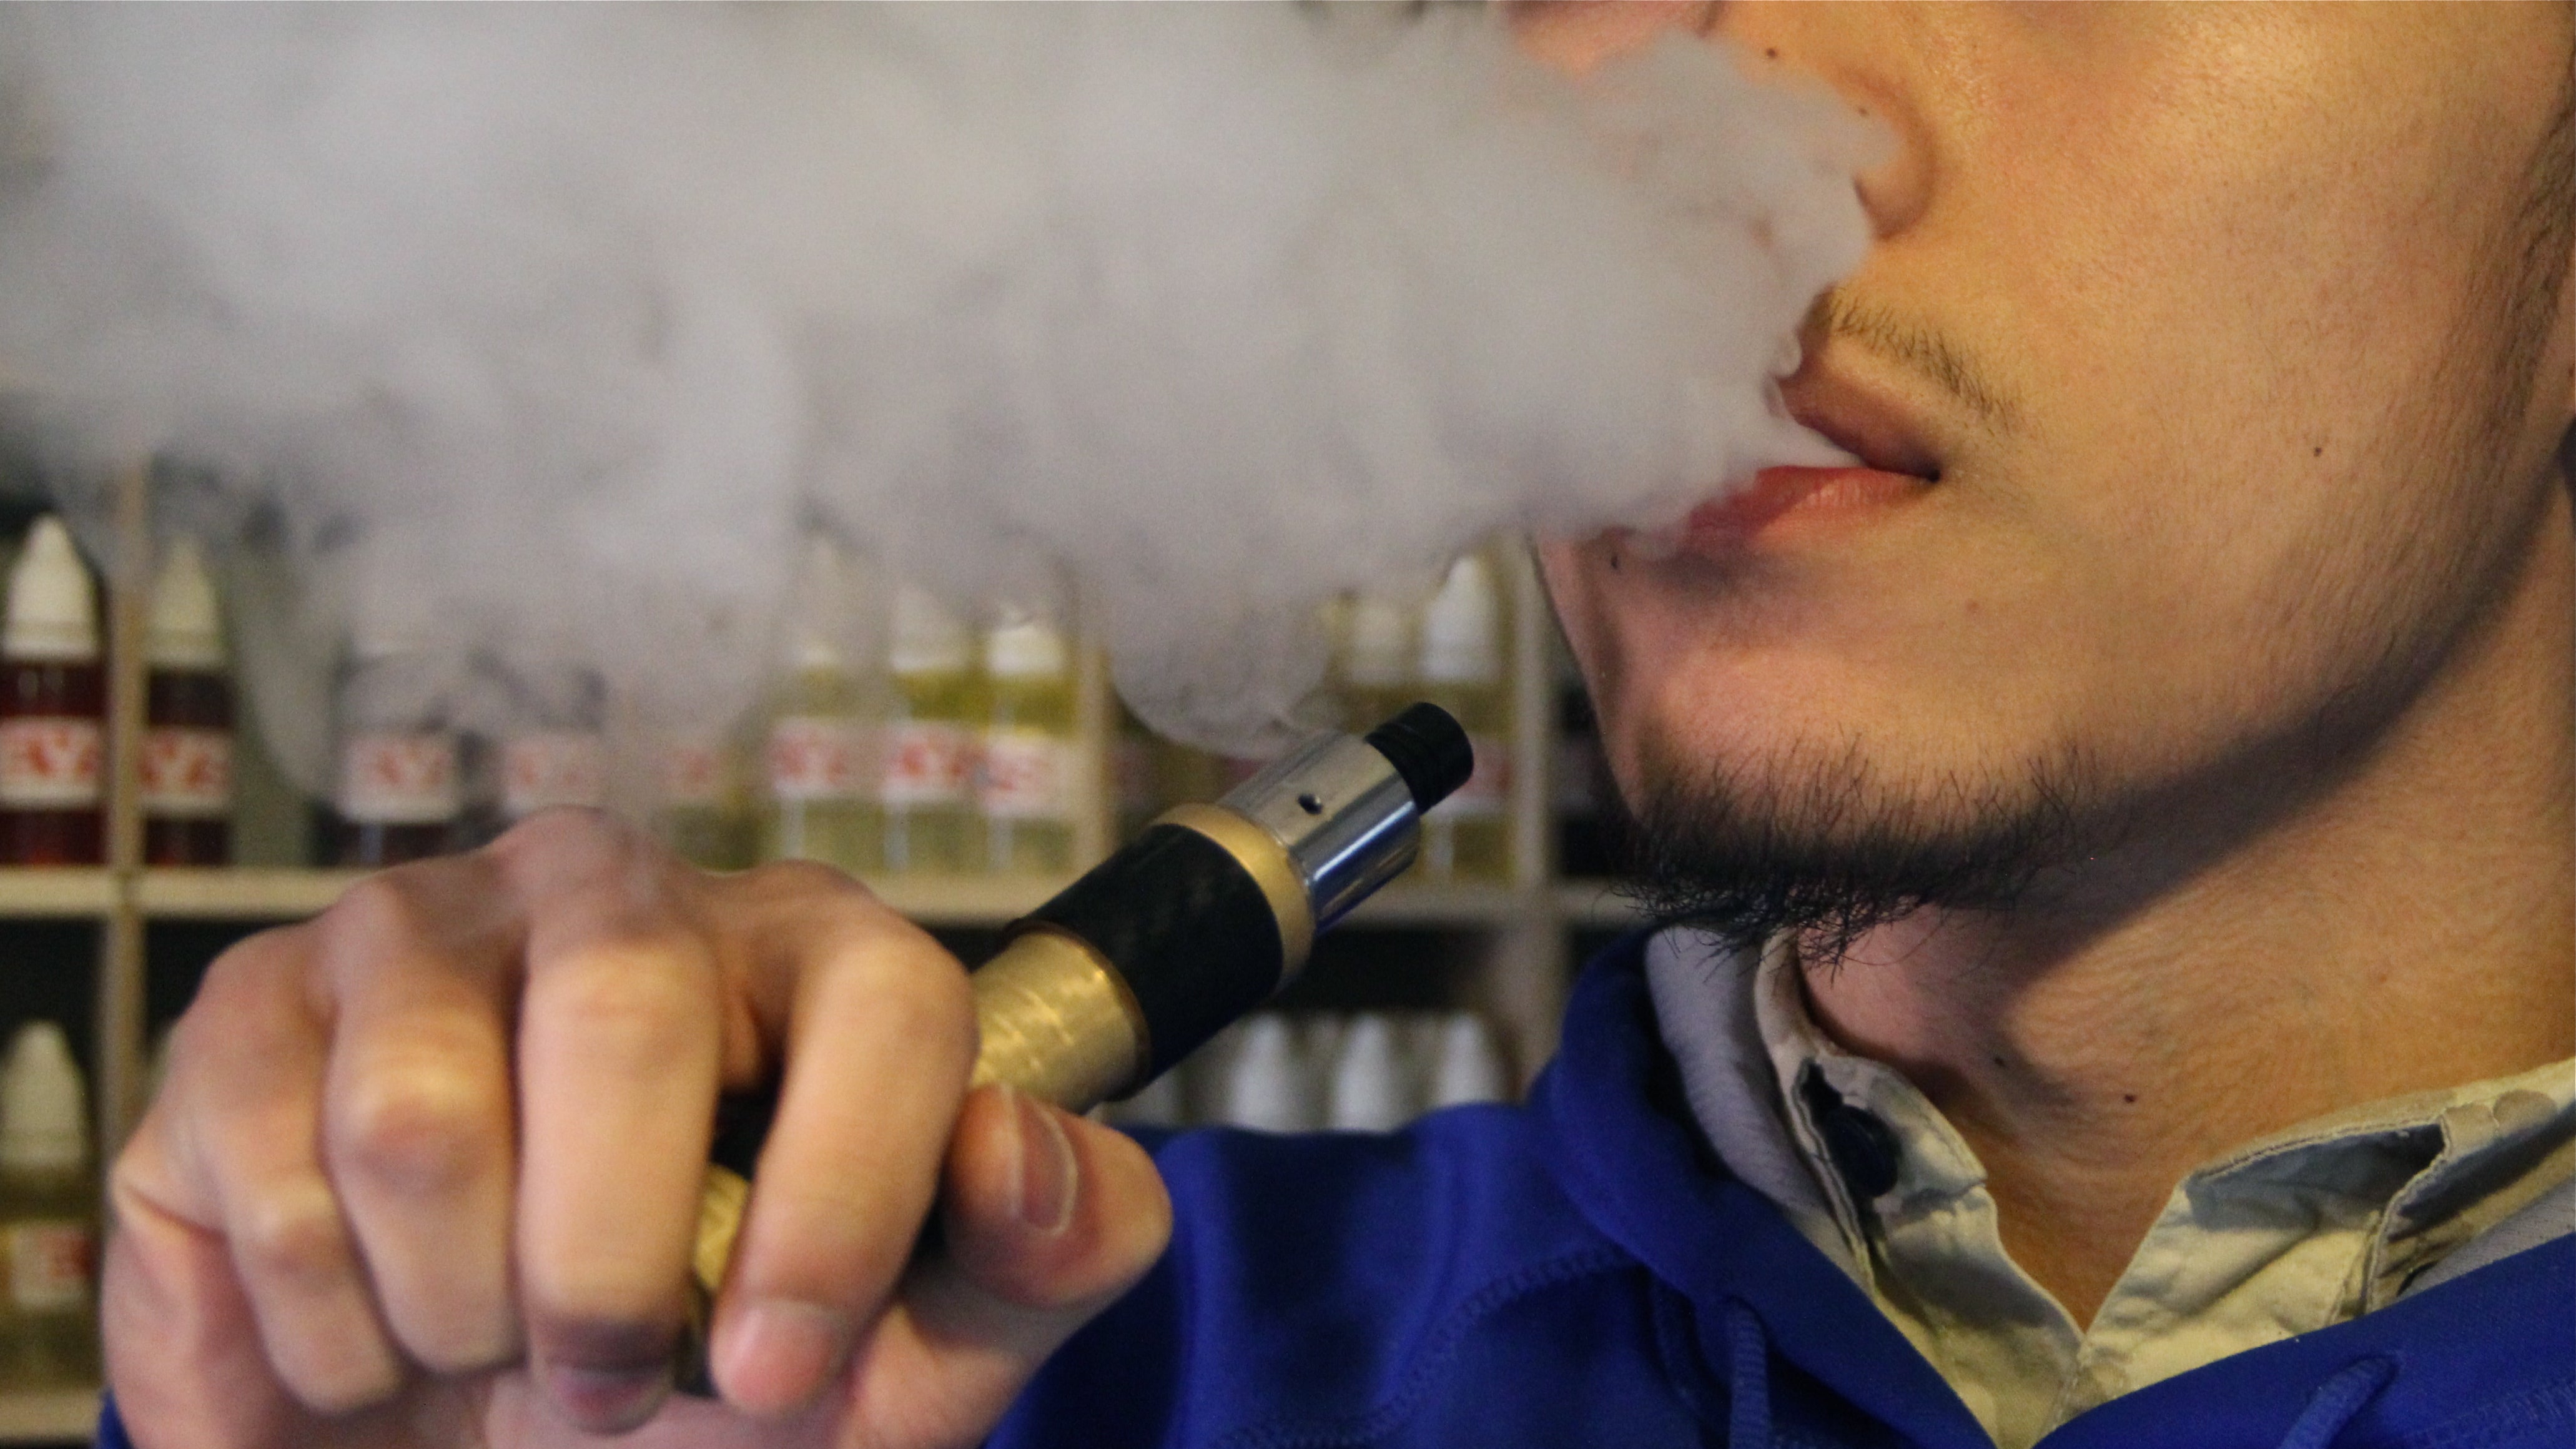  A new study finds that images of people vaping, such as found in commercials for e-cigarettes, cause former smokers to crave regular cigarettes. (Emma Lee/WHYY) 